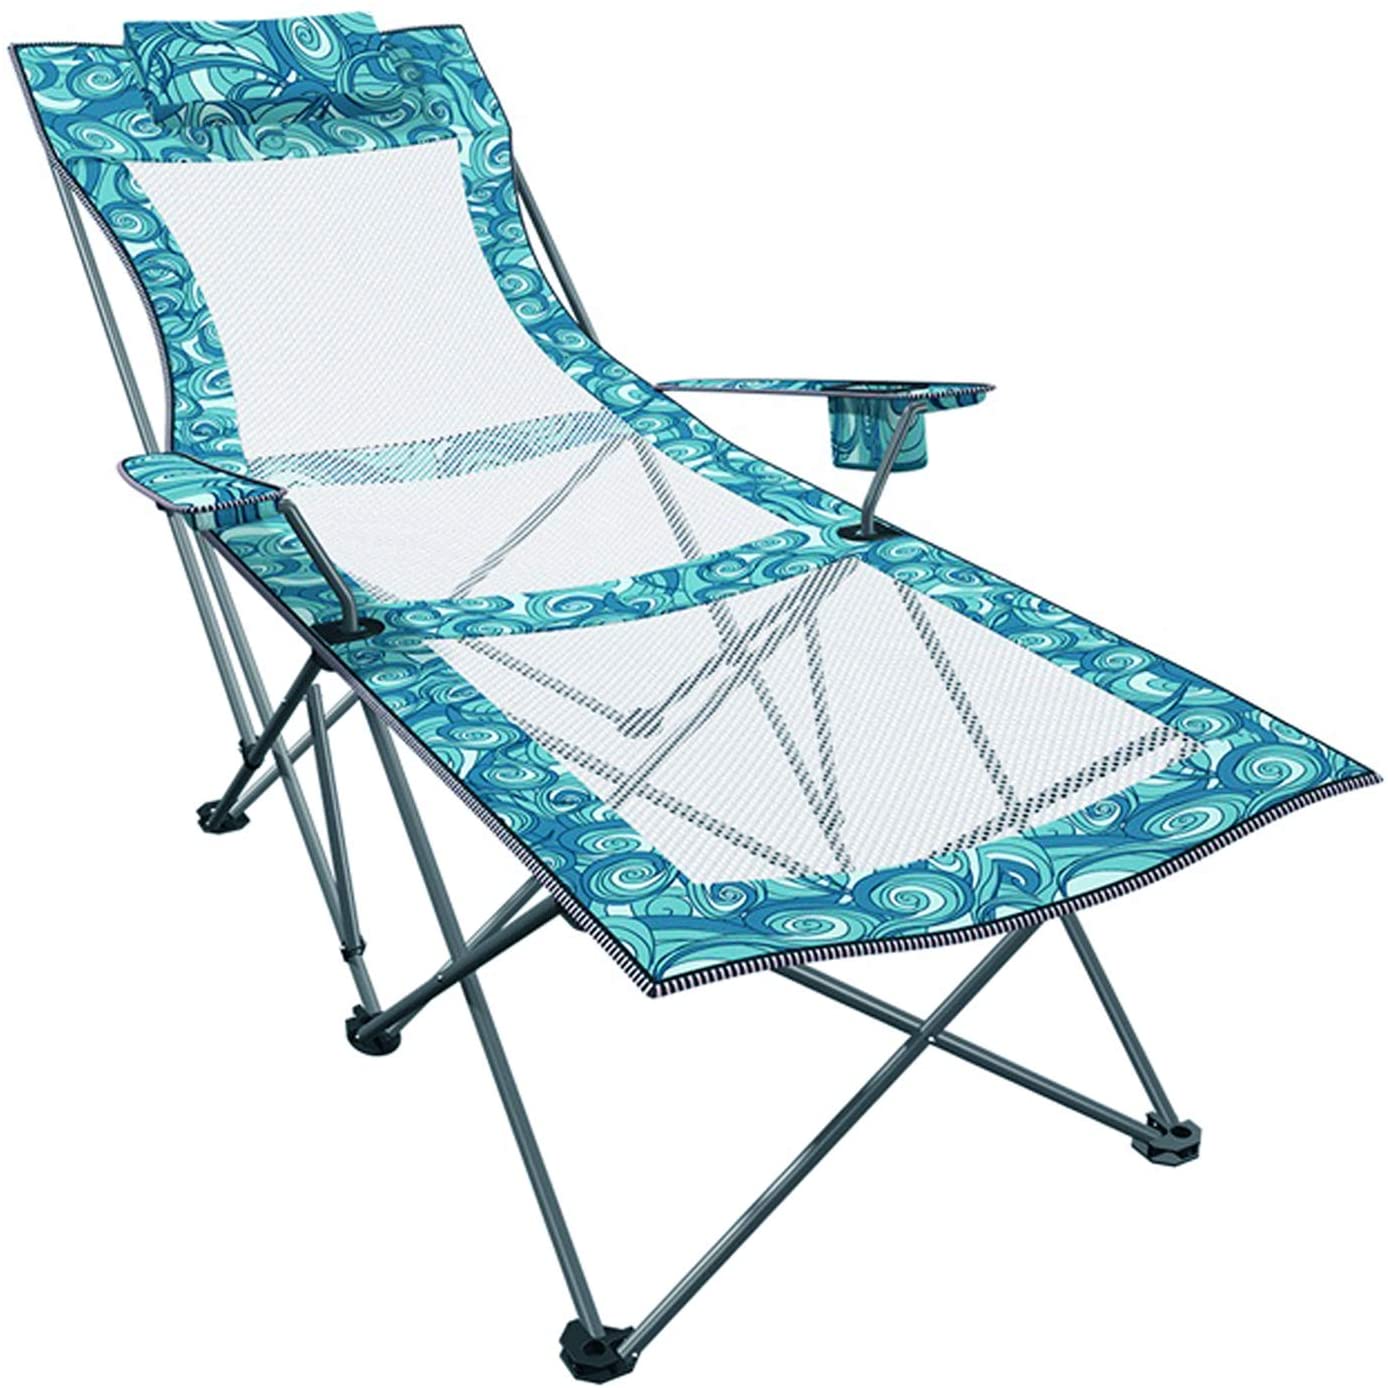 Best Beach Lounge Chair in 2020 Review and Guide